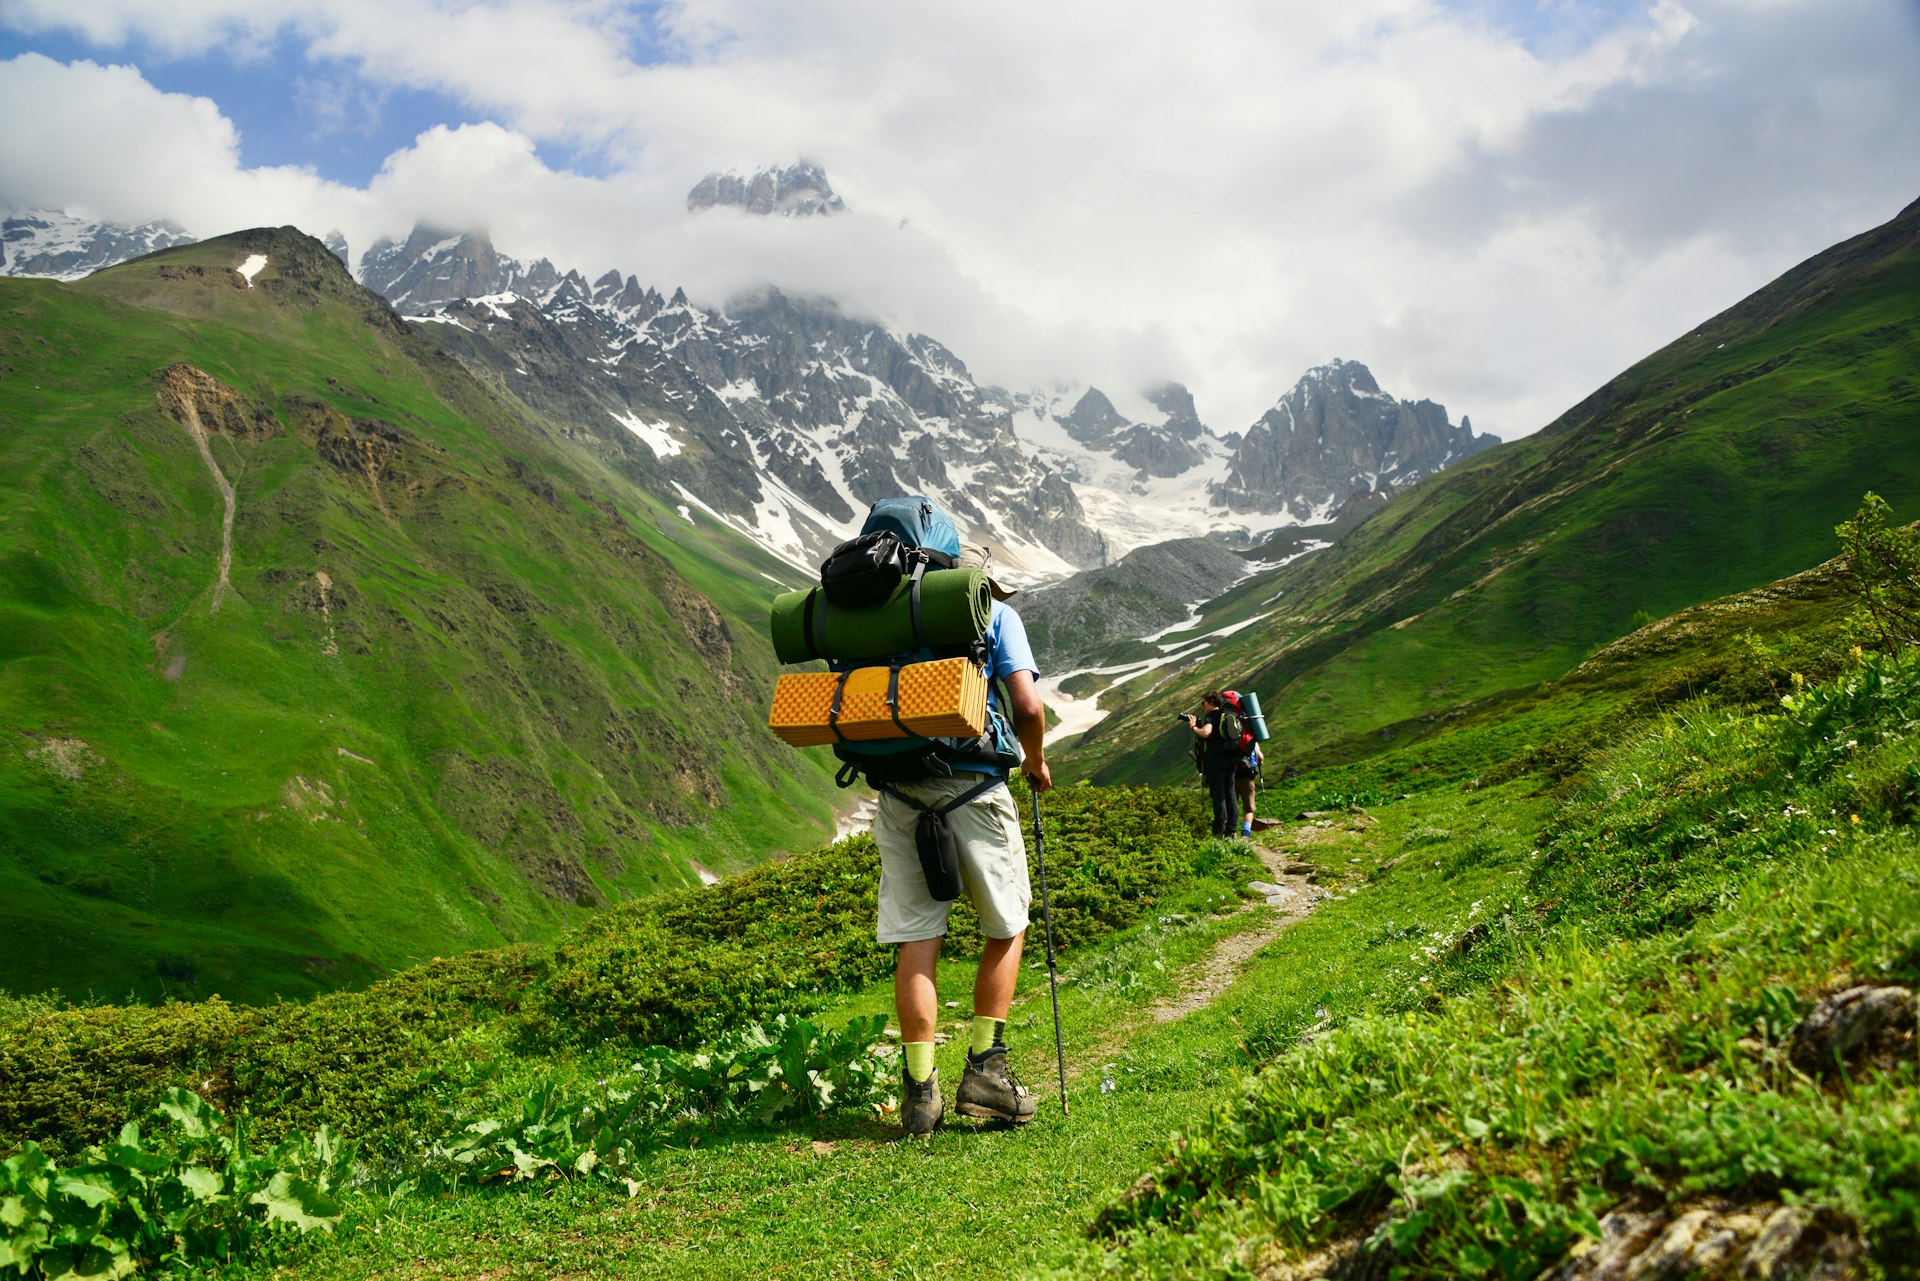 Hikers walk along a lush green mountain trail from Svaneti, through the huge peaks of the Caucasus mountains